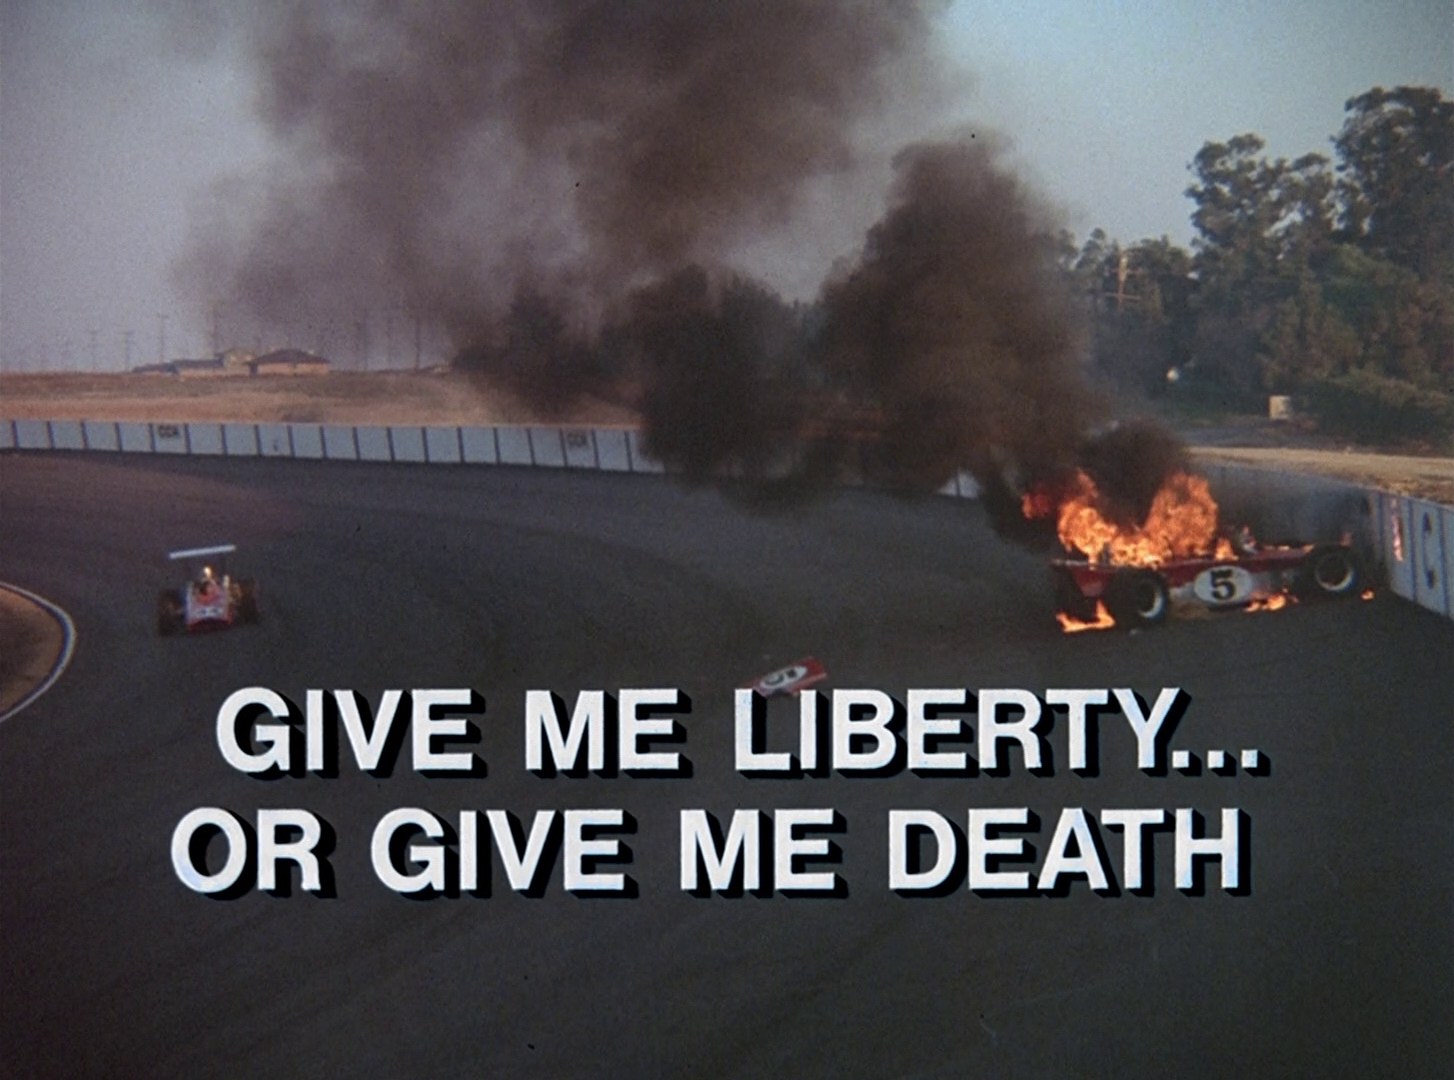 Knight Rider Season 1 - Episode 14 - Give Me Liberty... Or Give Me Death - Photo 1